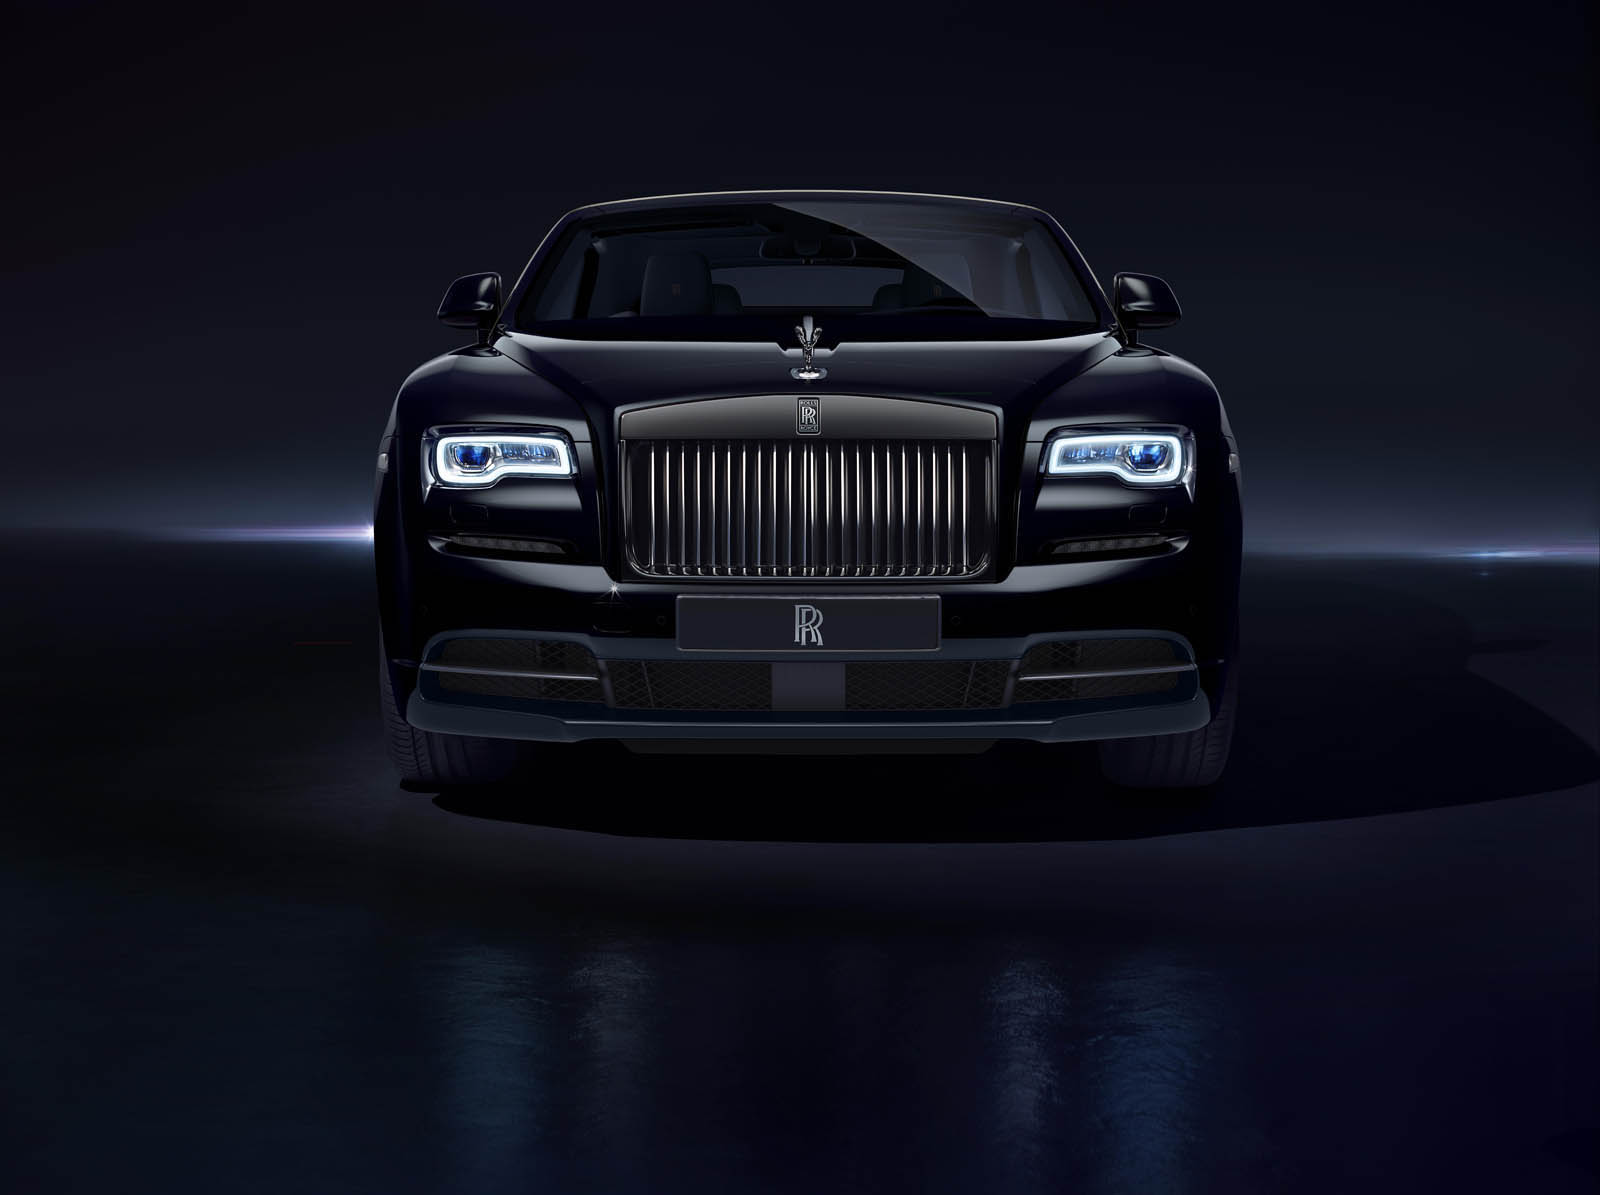 Rolls-Royce Goes All Black With New 593-HP Black Badge Edition ...